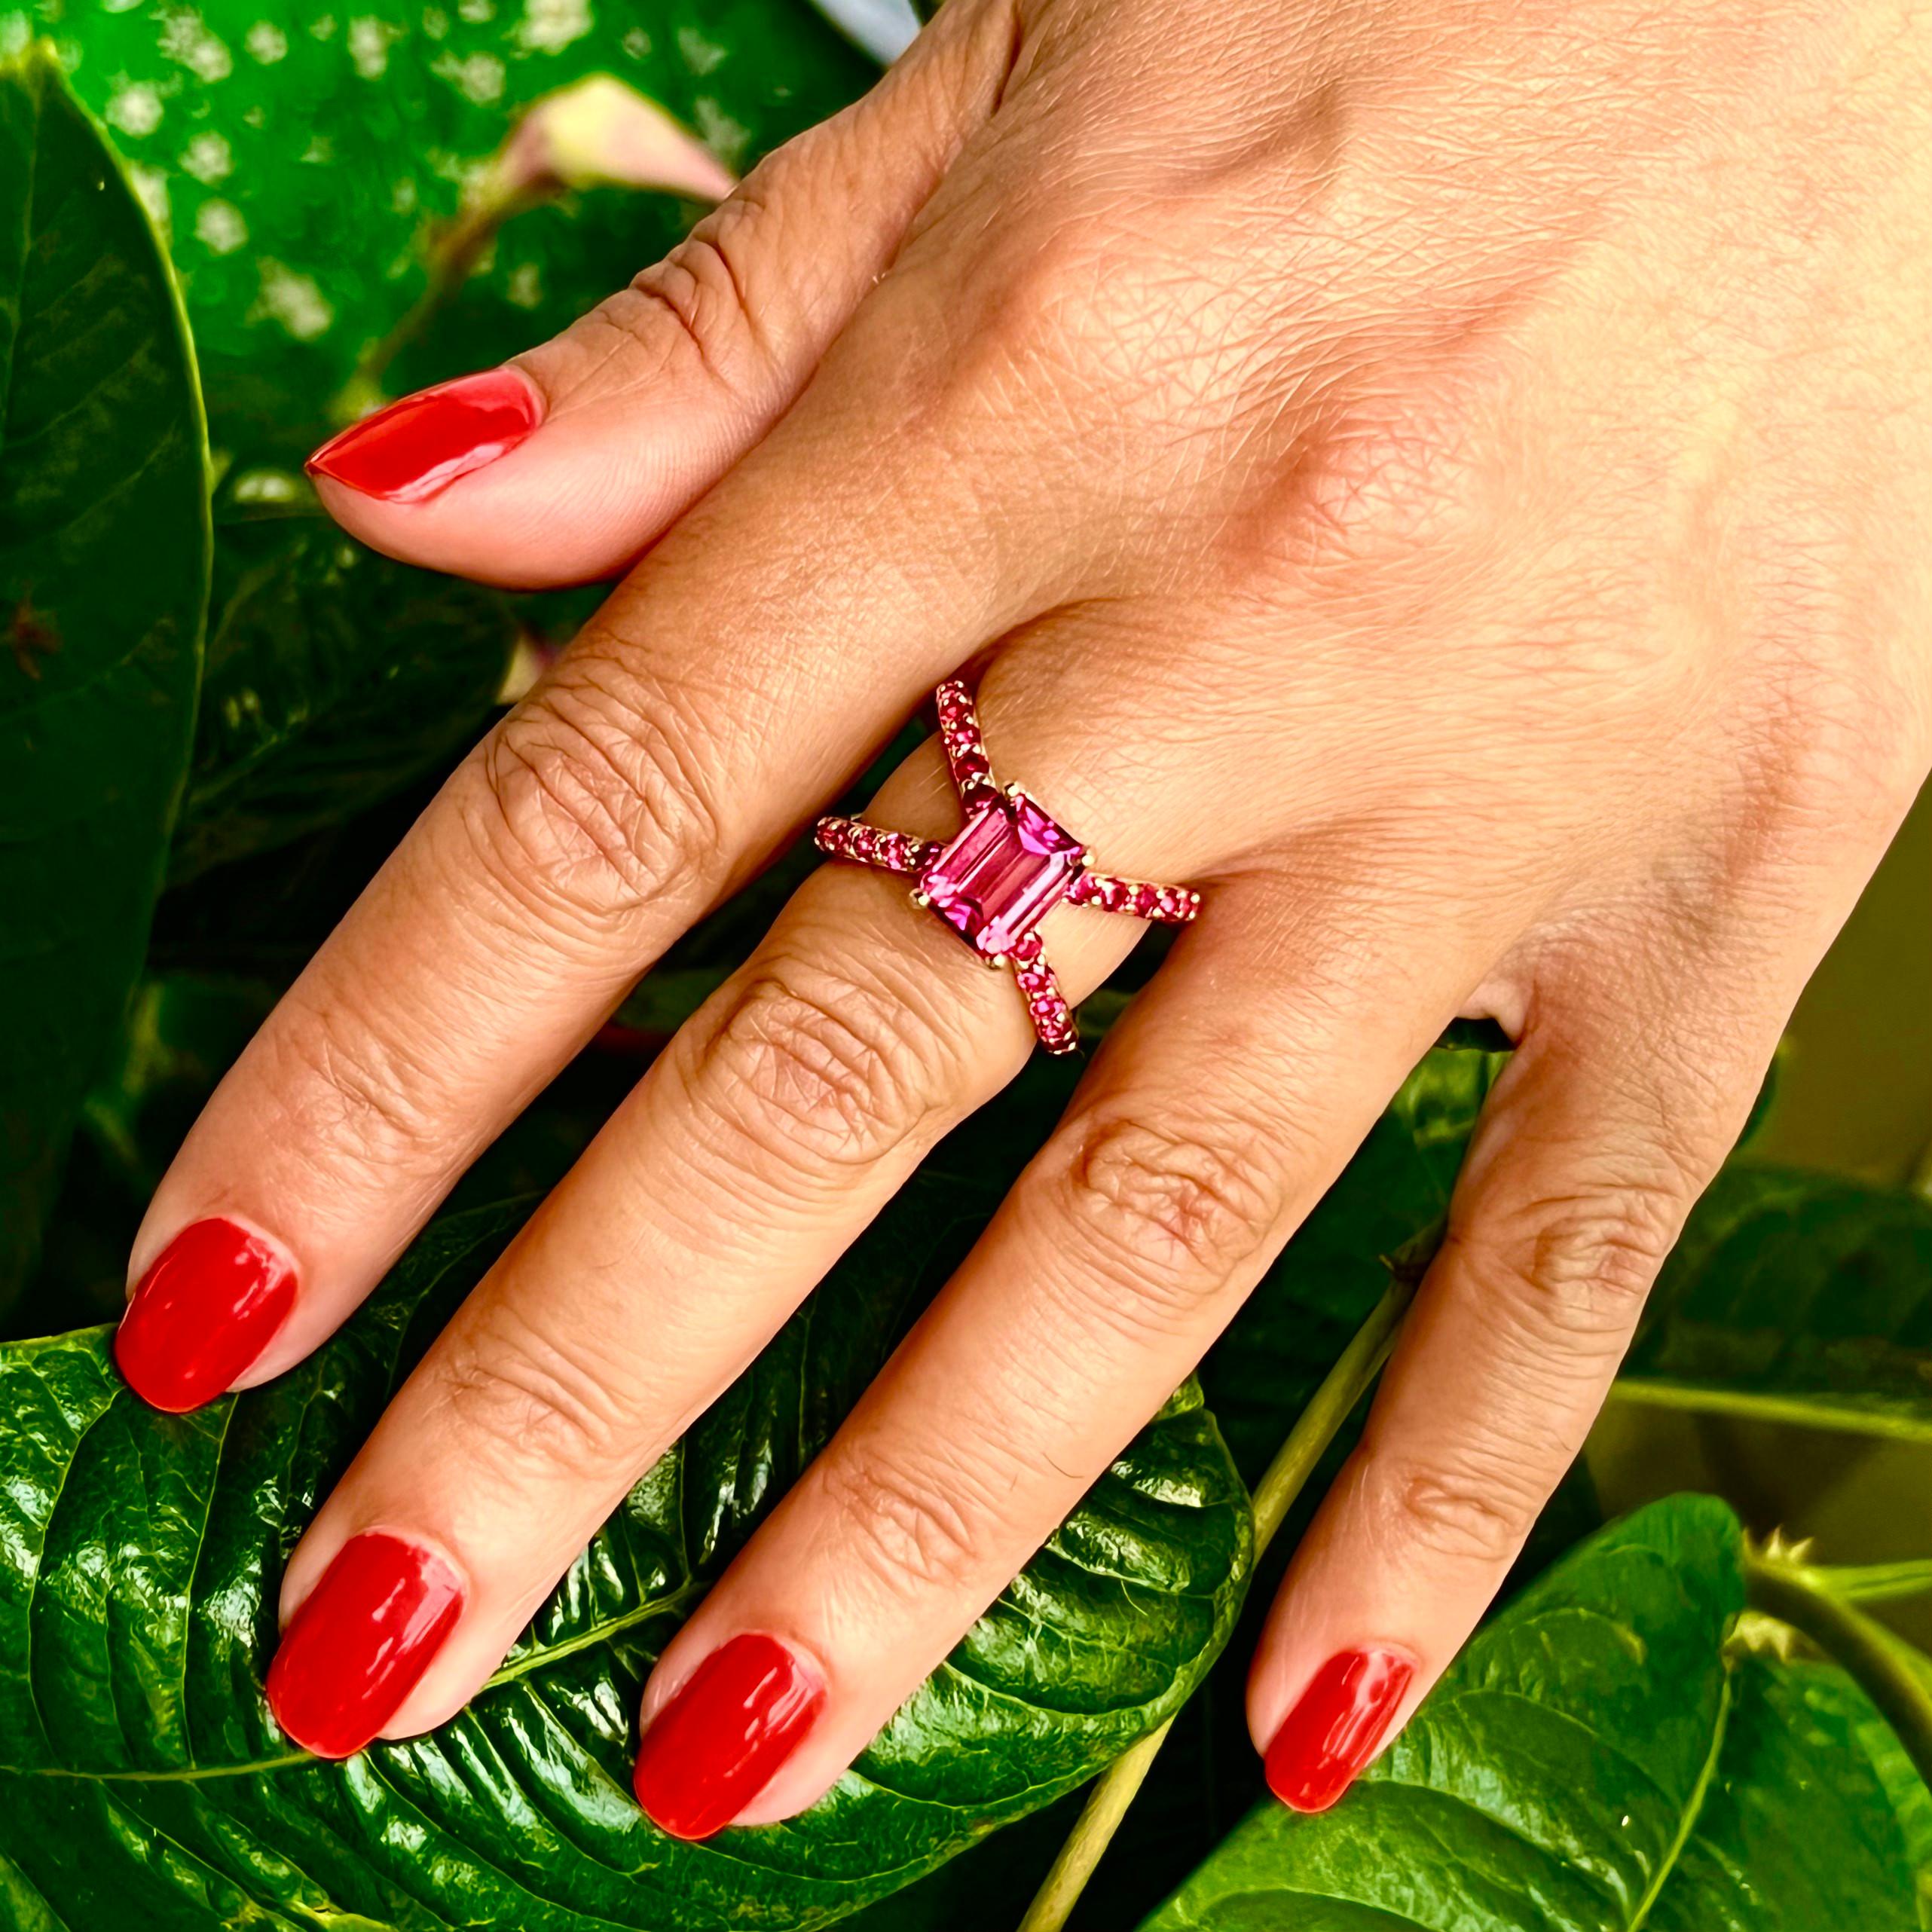 Natural Pink Tourmaline Ruby Ring Size 6 14k Y Gold 3.33 TCW Certified $5,950 216193

This is a one of a Kind Unique Custom Made Glamorous Piece of Jewelry!

Nothing says, “I Love you” more than Diamonds and Pearls!

This item has been Certified,